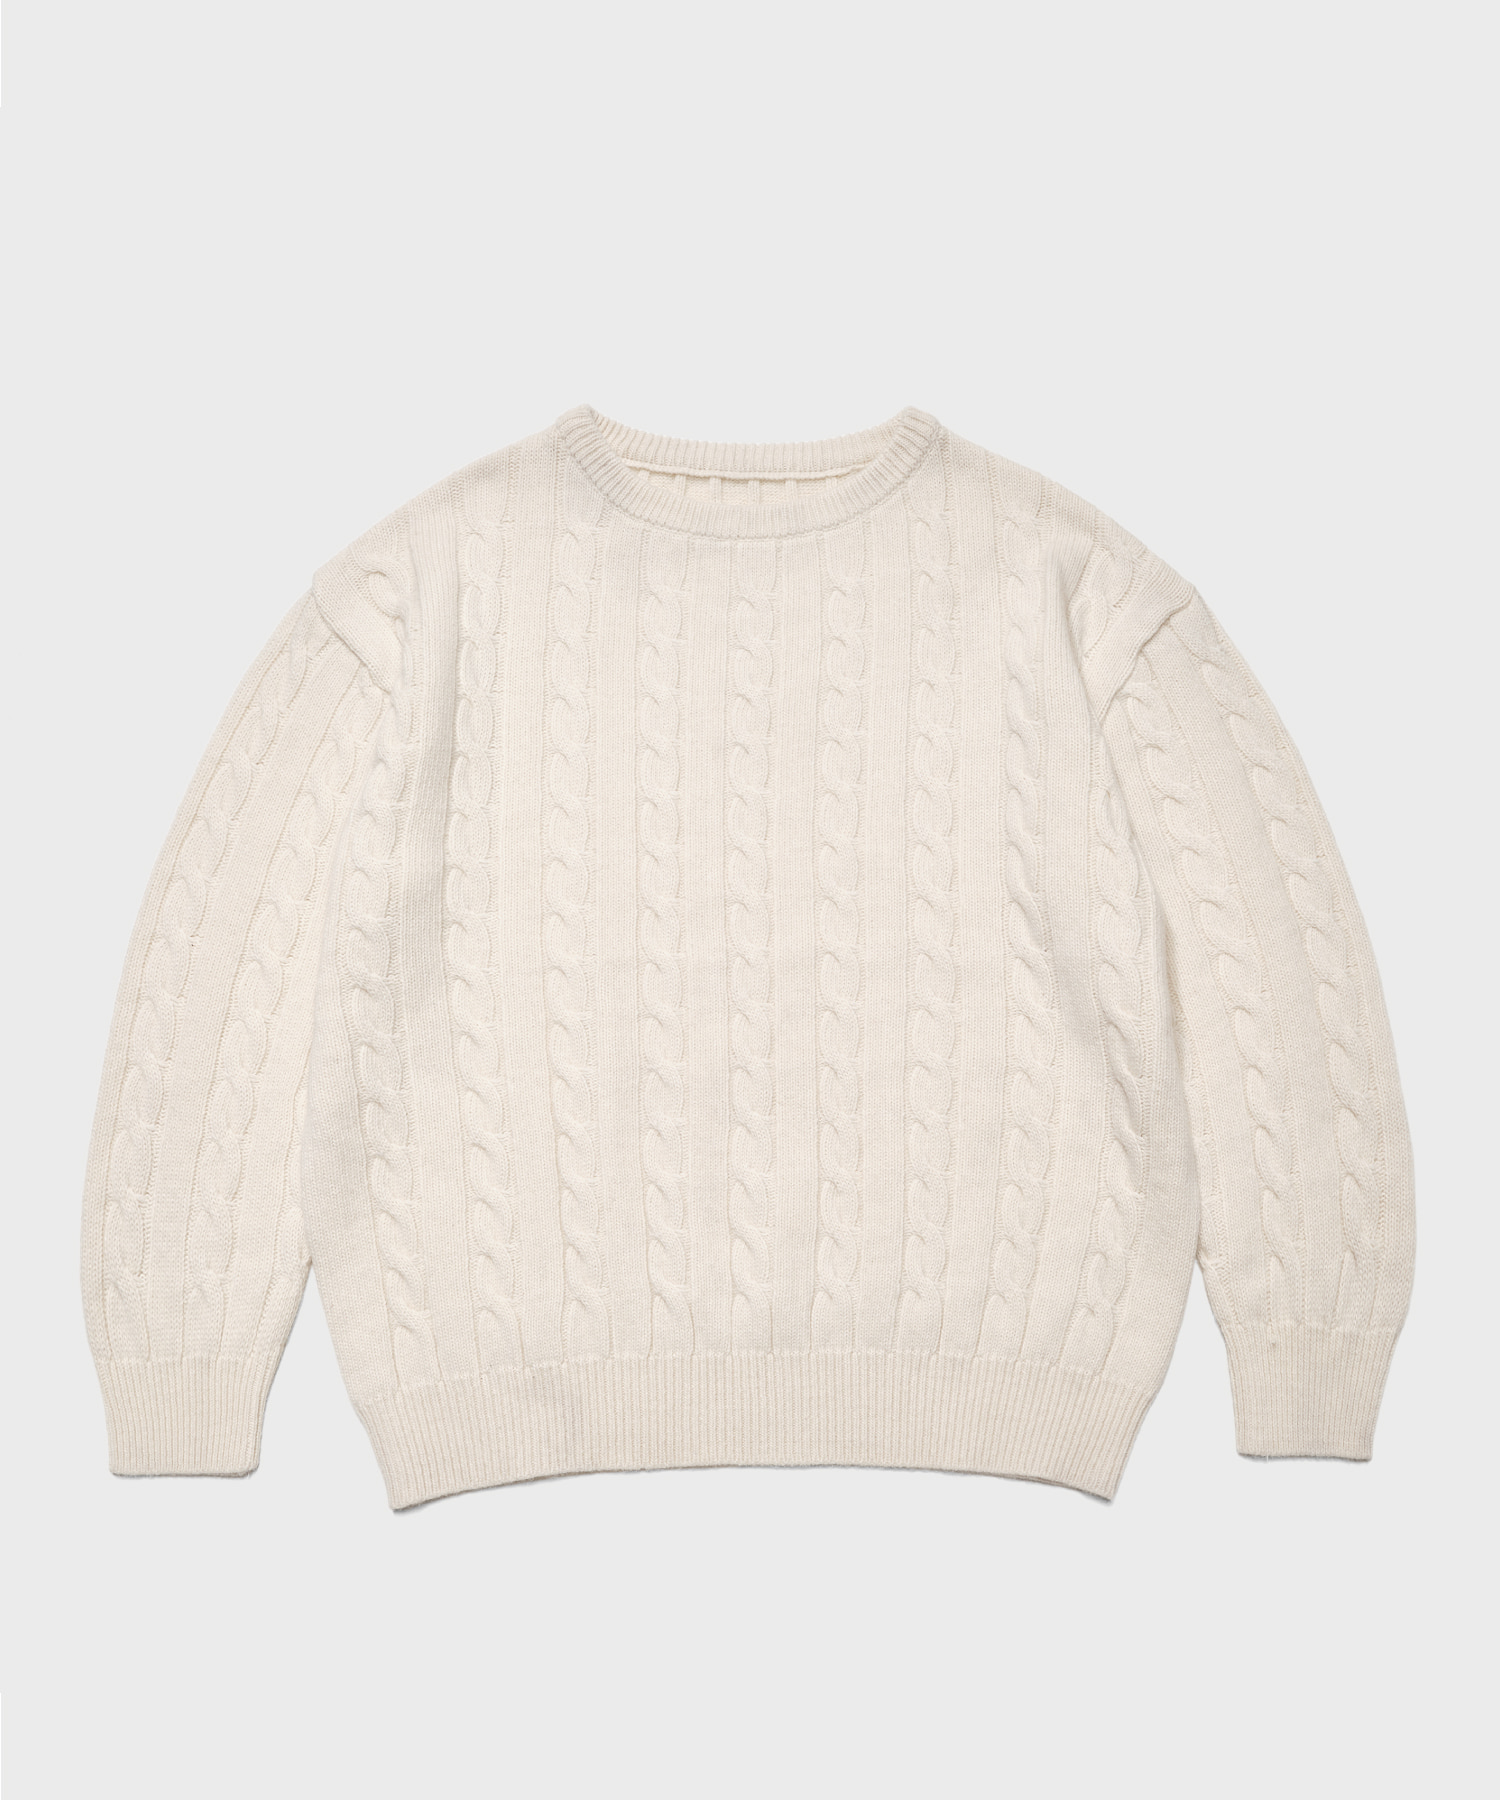 Boatneck cable knit Ivory